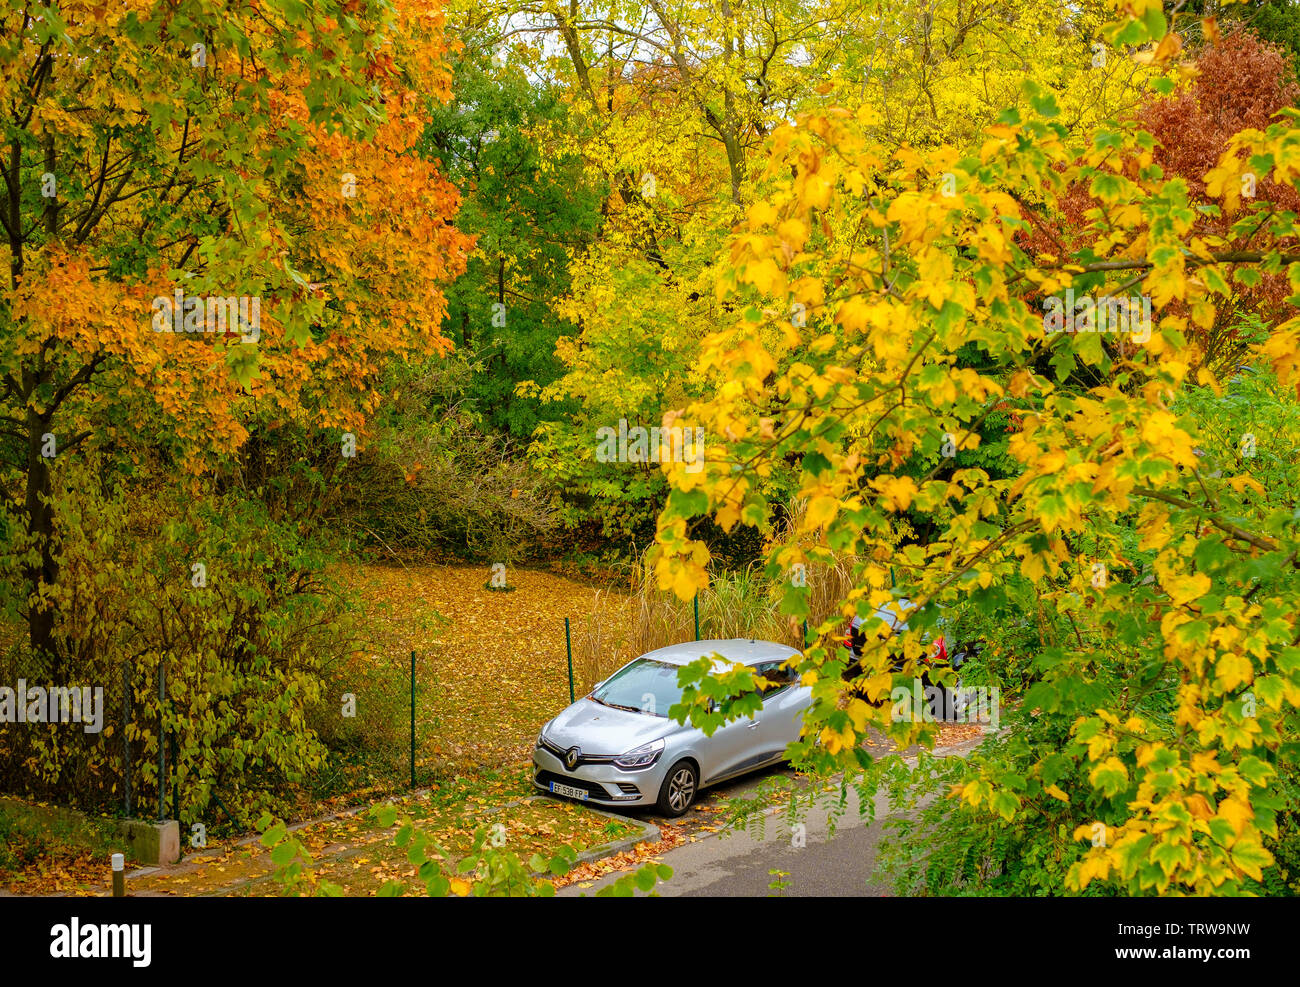 Trees with autumn colours, car parked on street, Strasbourg, Alsace, France, Europe, Stock Photo